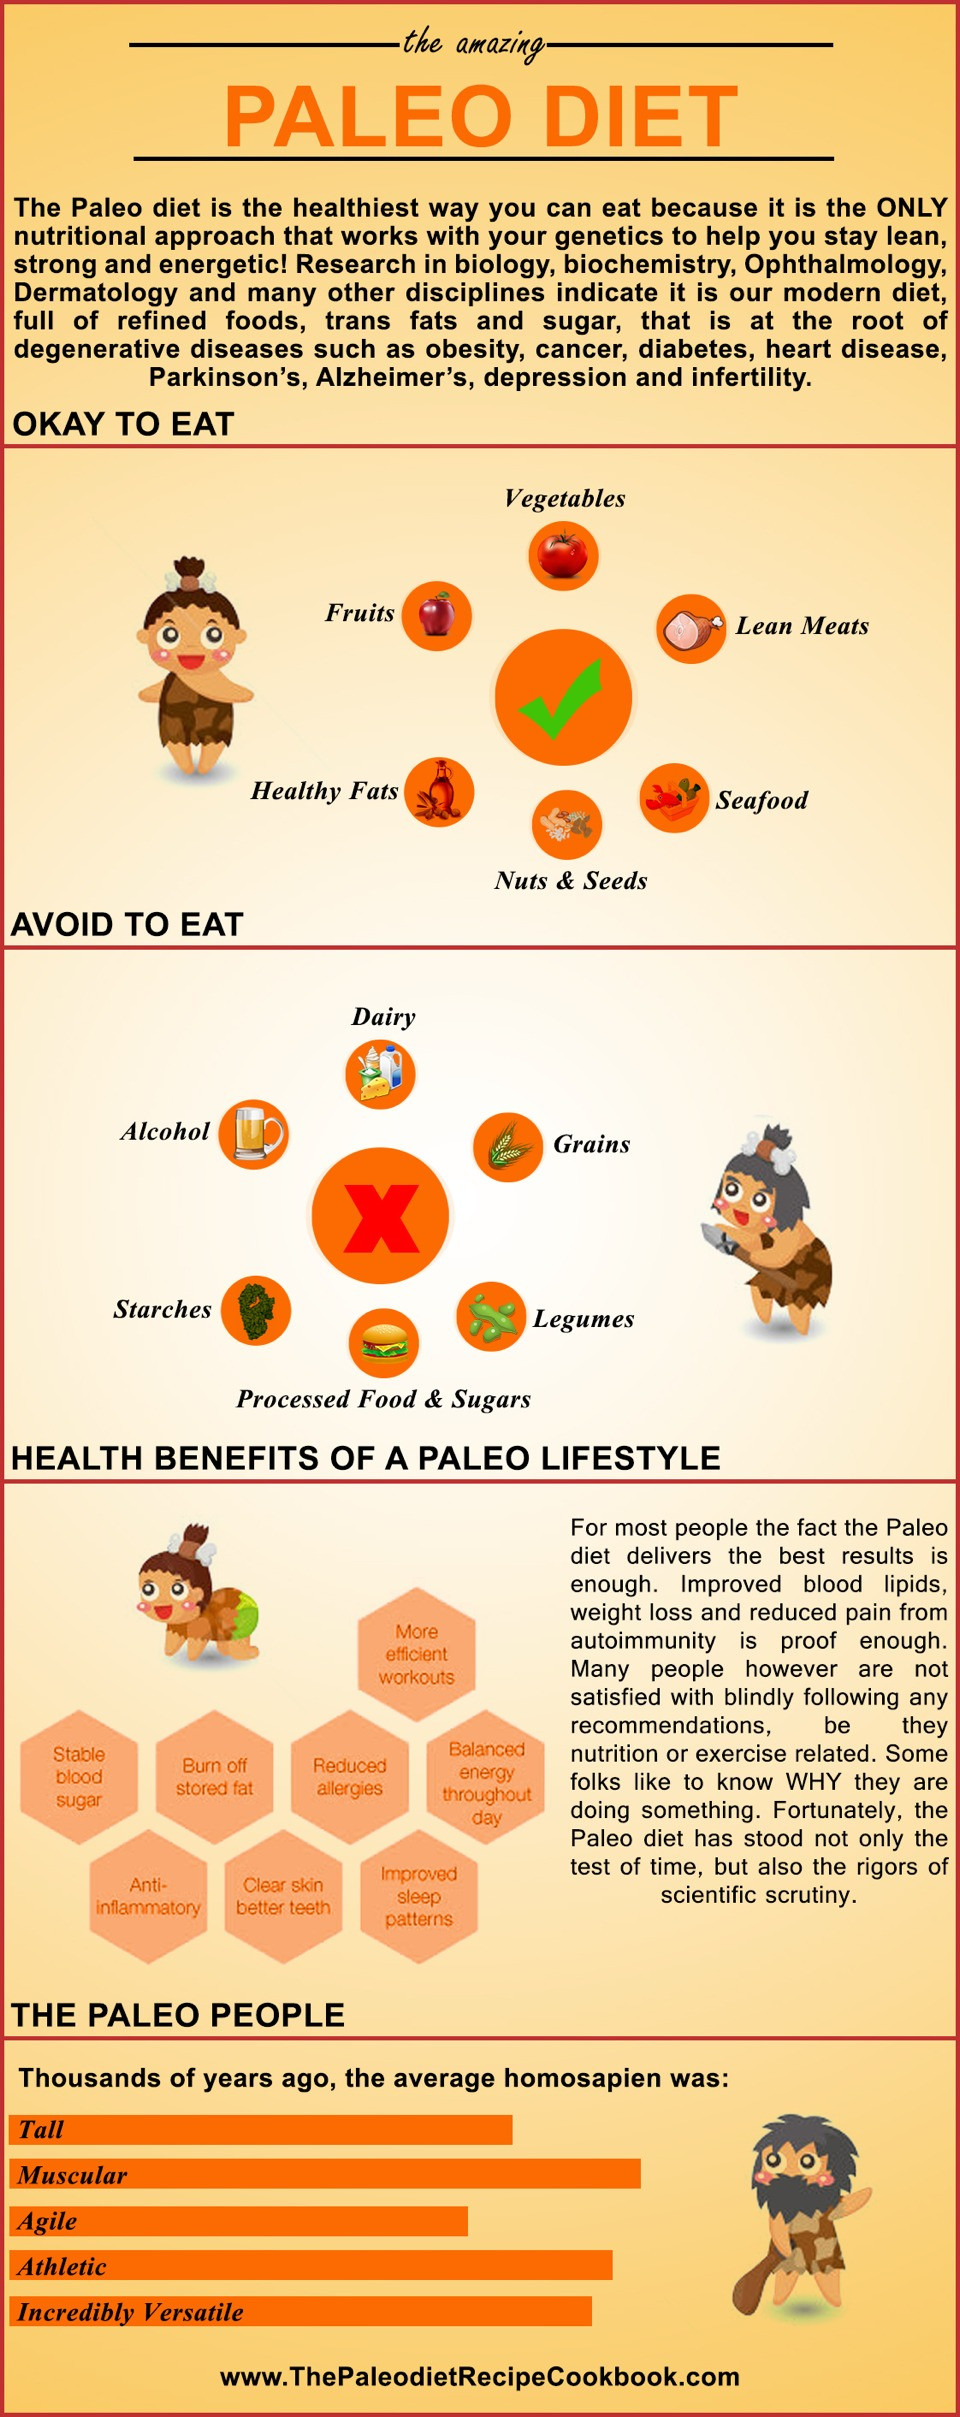 Health Benefits Of Paleo Diet
 The Paleo Diet Has Many Health Benefits Including Weight